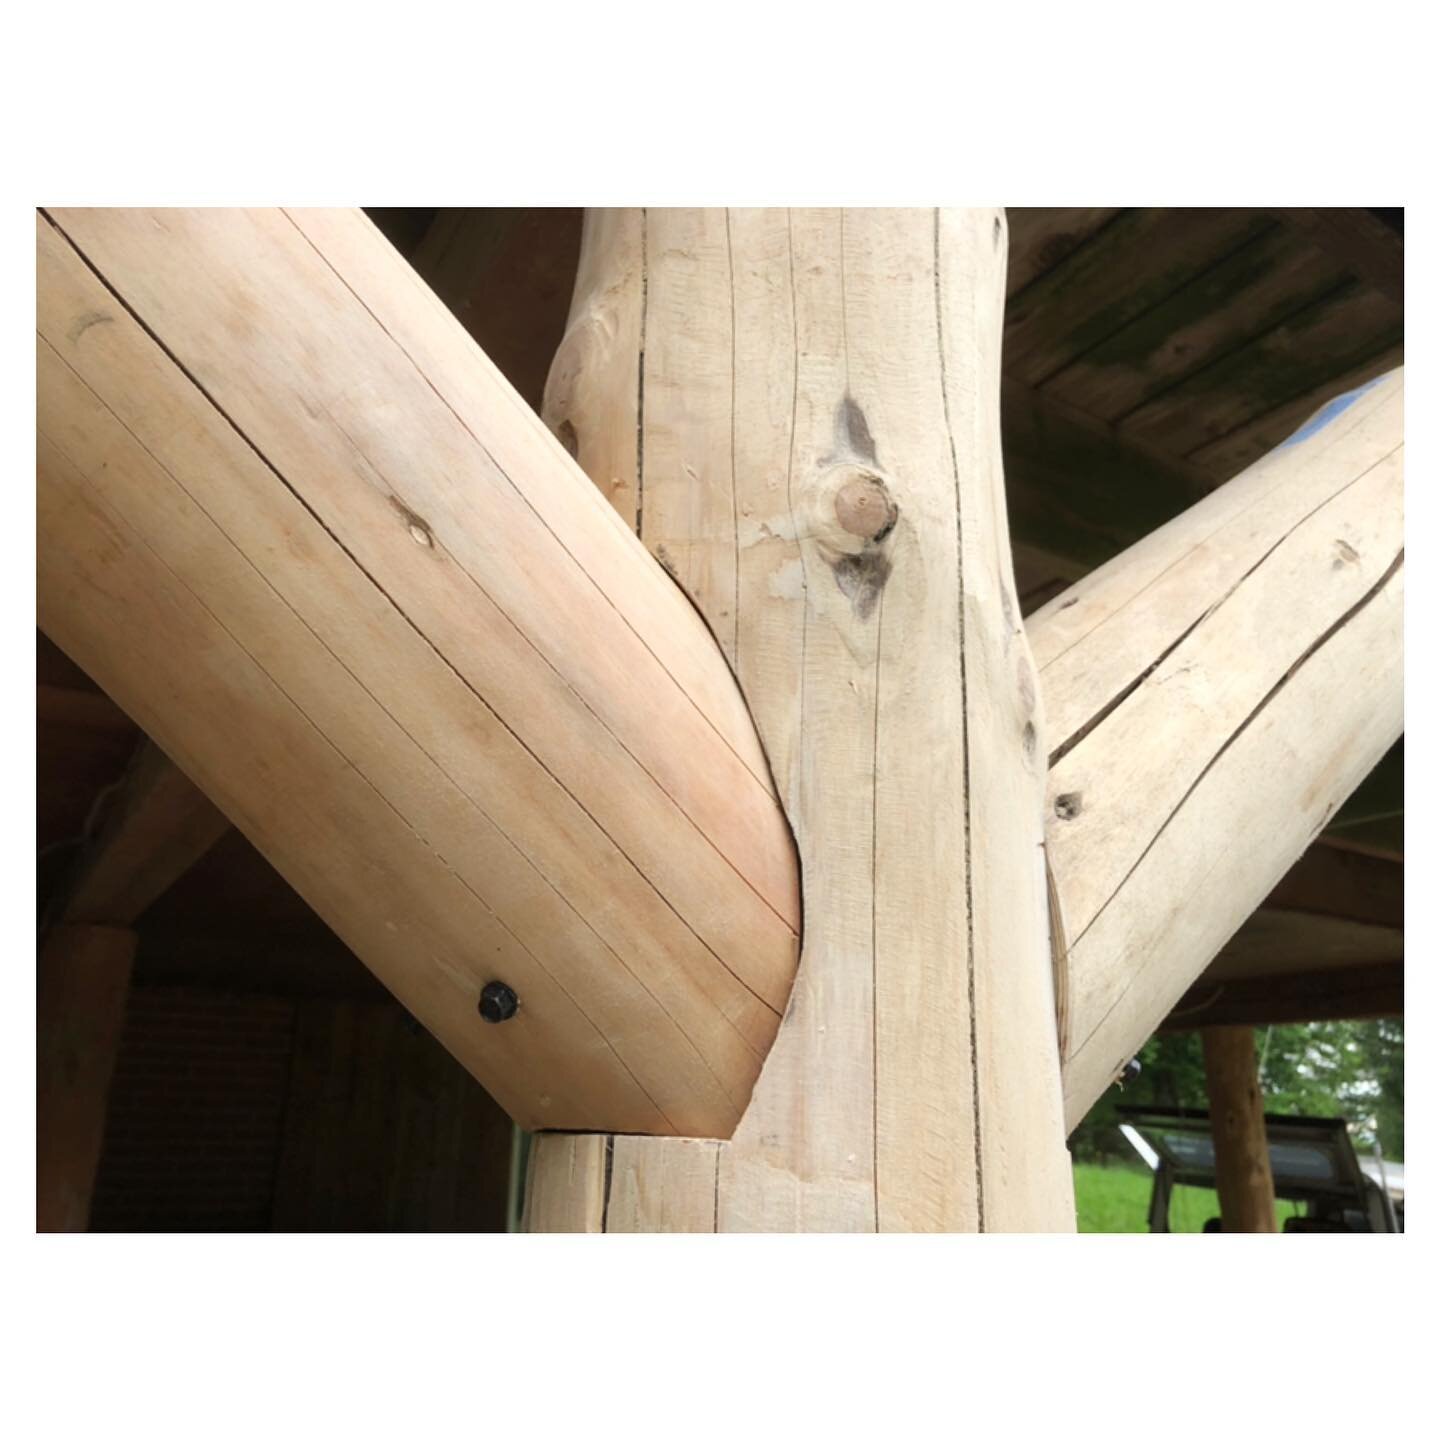 Working with roundwood is immensely satisfying &mdash; and it&rsquo;s a very eco friendly building material. Local sources abound, no milling is required and it&rsquo;s a stronger material than its square counterpart. 
I was queried about how to go a